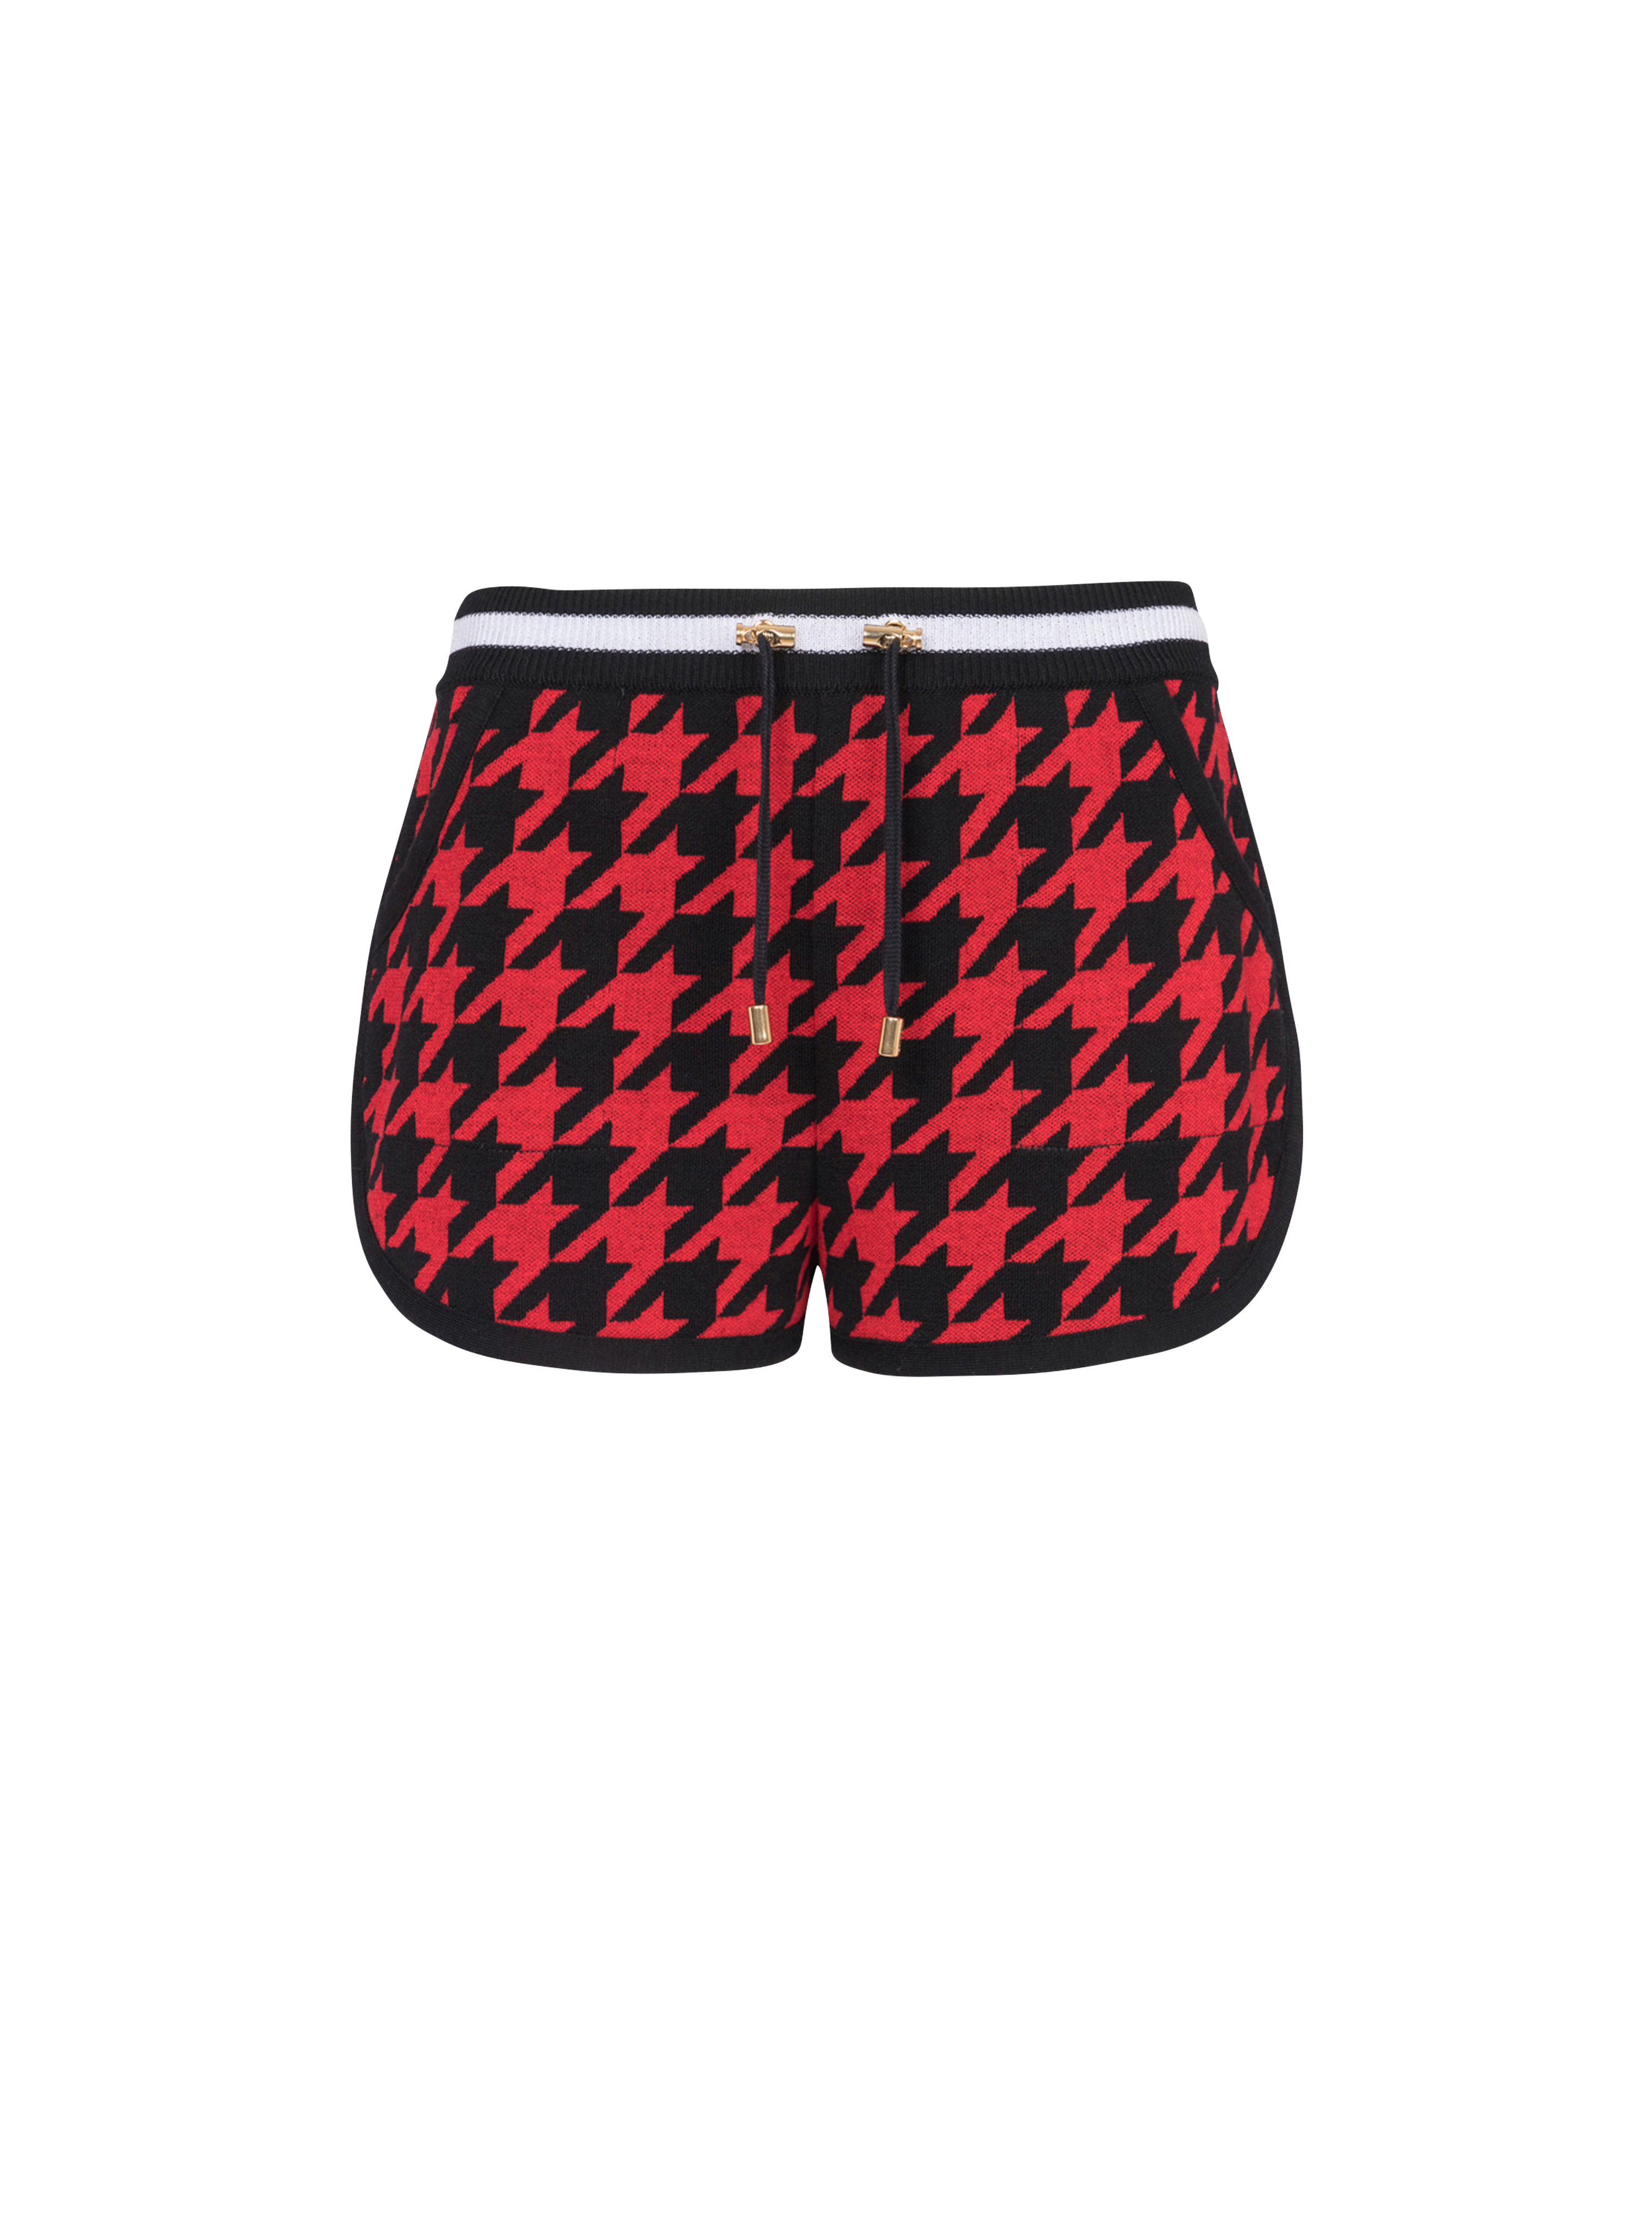 Houndstooth print knit shorts, red